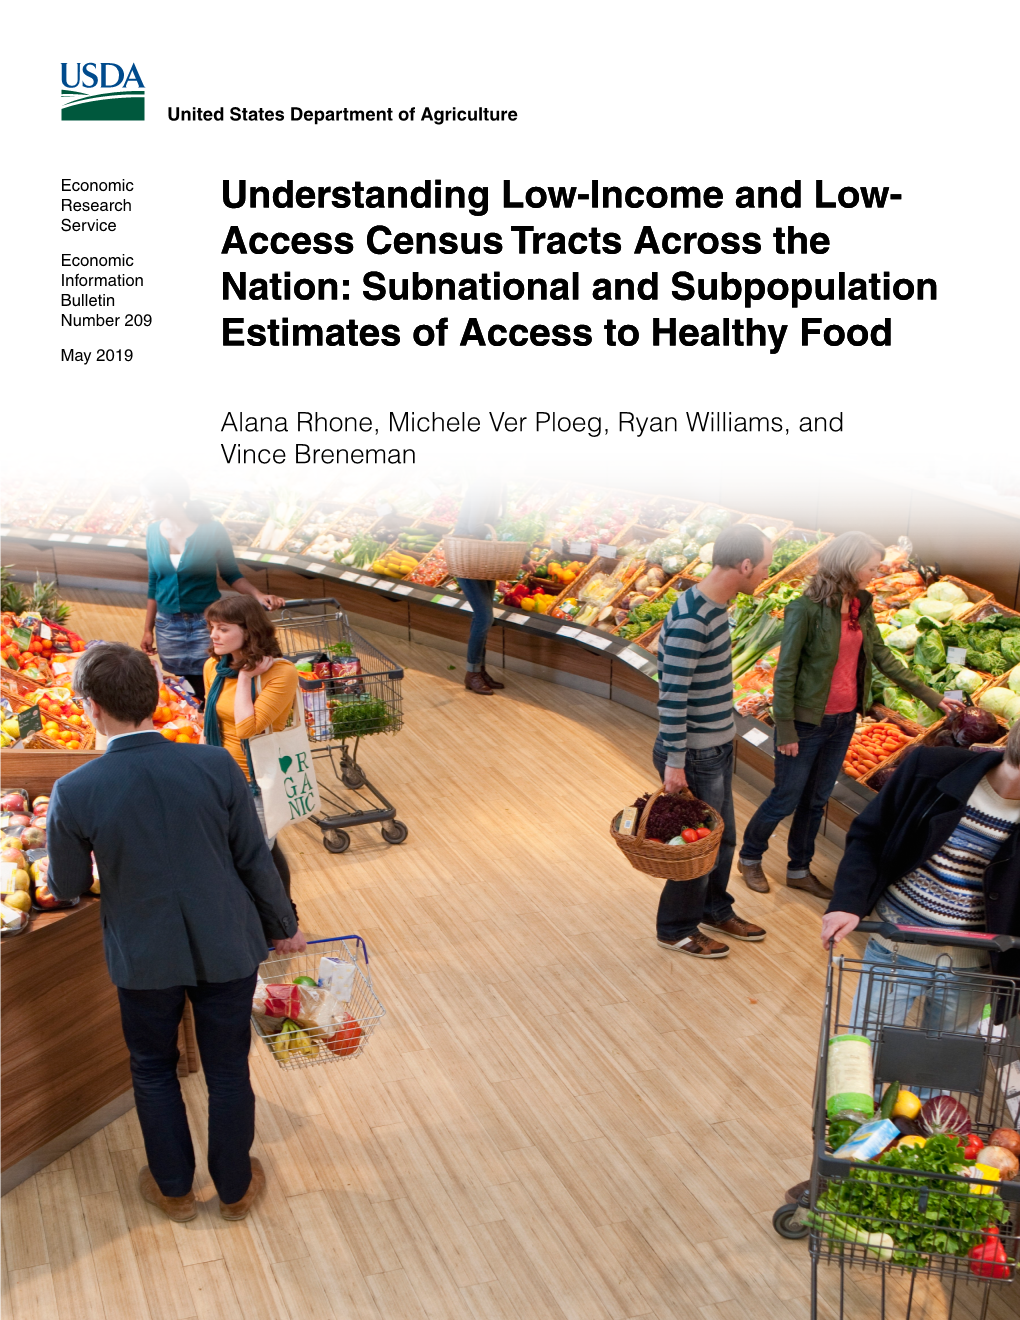 Understanding Low-Income and Low-Access Census Tracts Across the Nation: Subnational and Subpopulation Estimates of Access to Healthy Food, EIB-209, U.S